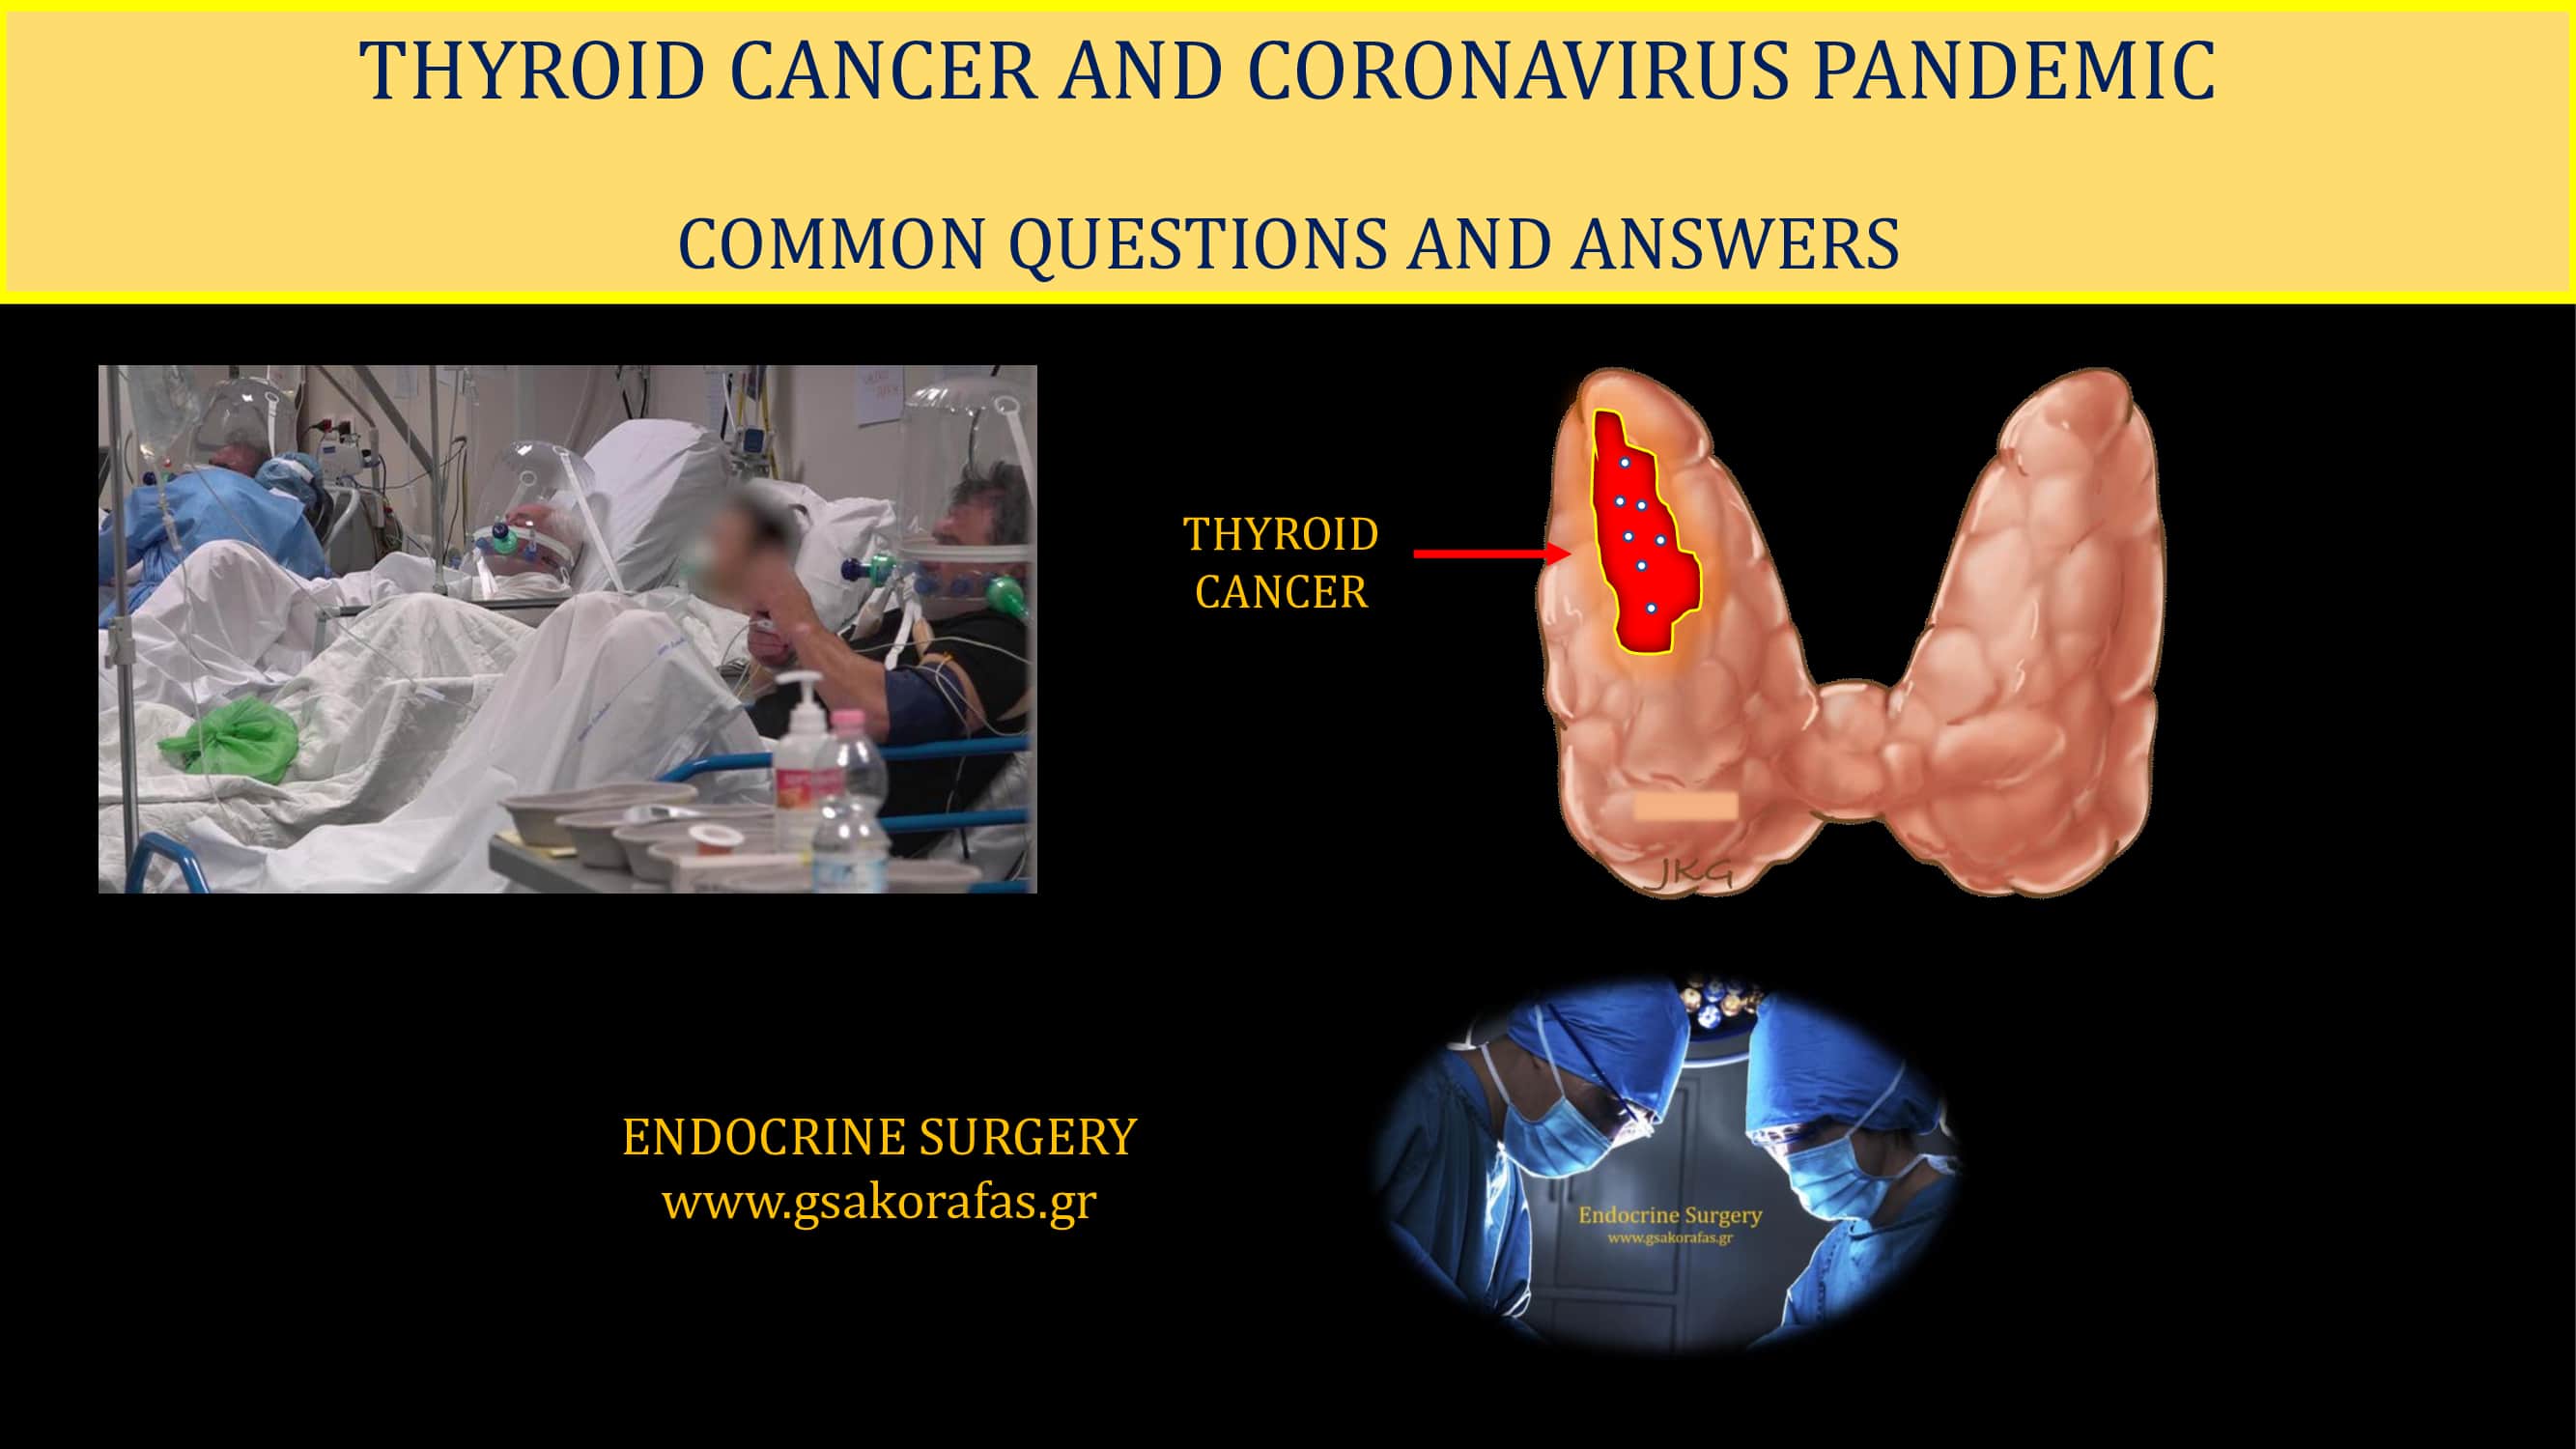 Thyroid cancer and coronavirus ( COVID-19 ) pandemic- Common Questions & Answers